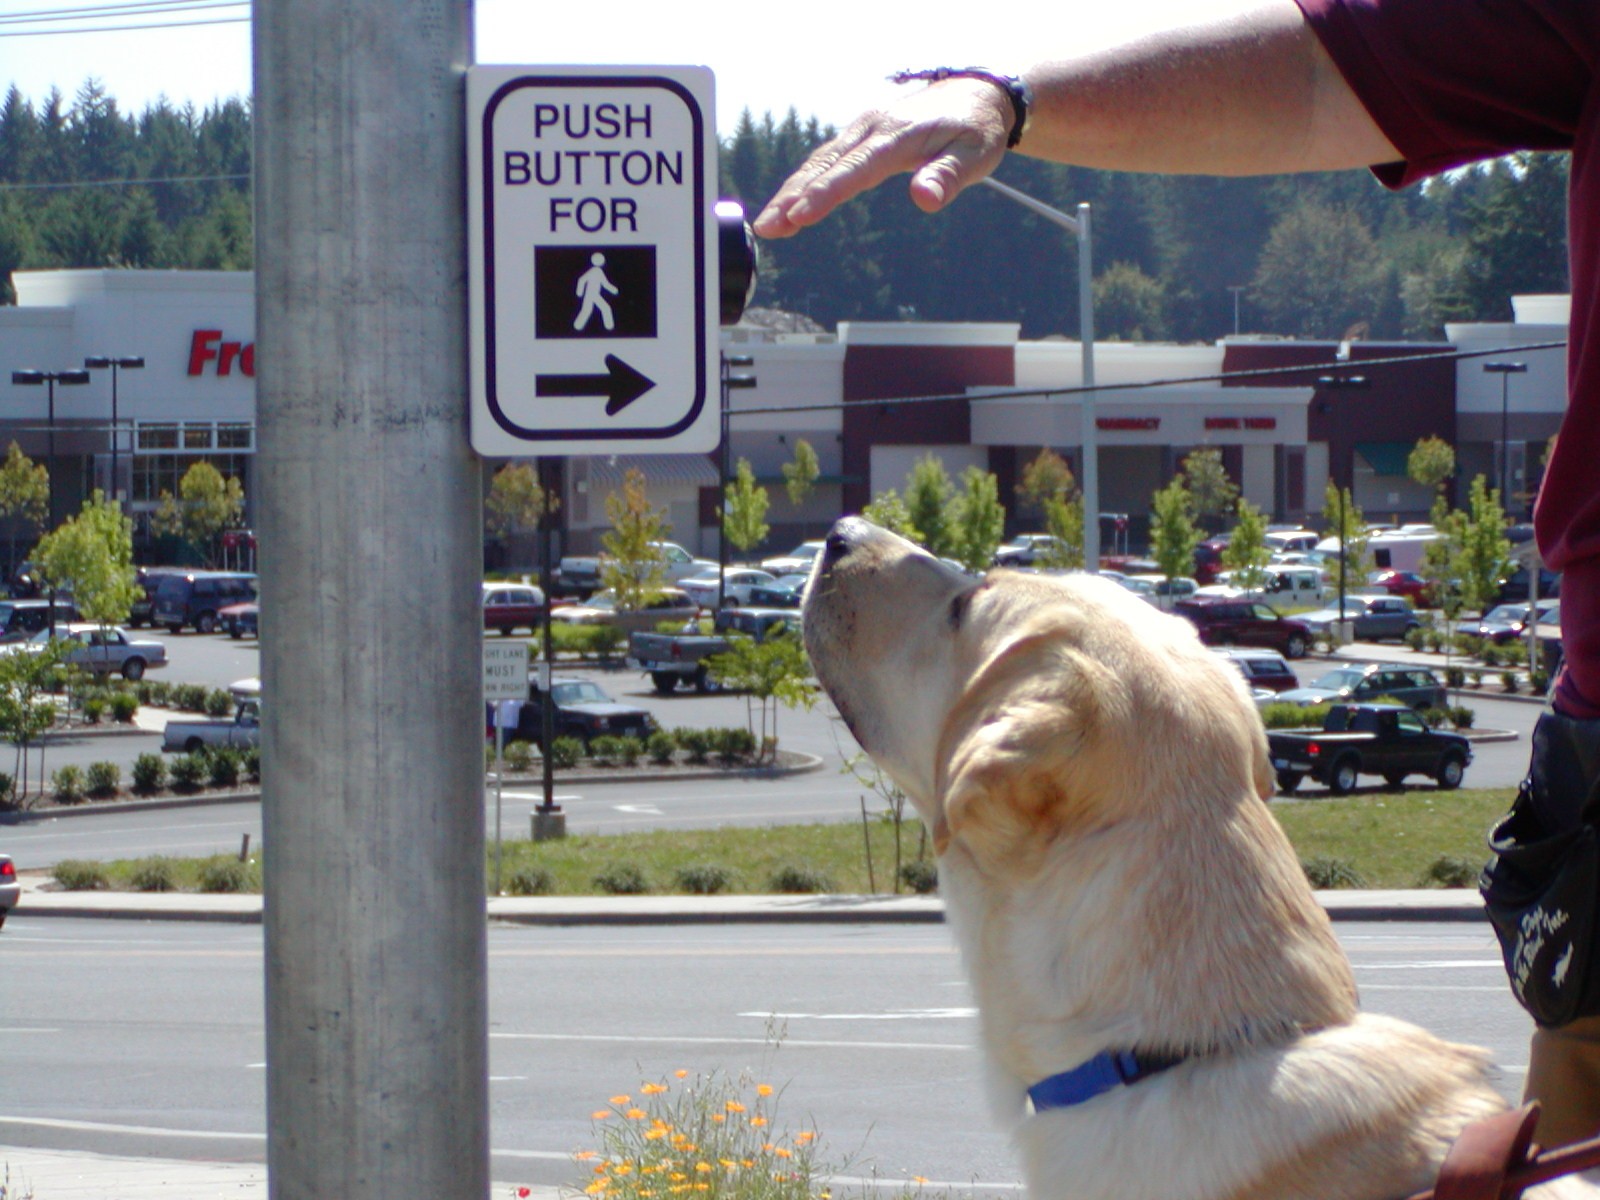 A yellow Labrador is being trained in how to push a button on a street sign that says “Push button for” with an icon of a person walking, with a shopping center in the background.